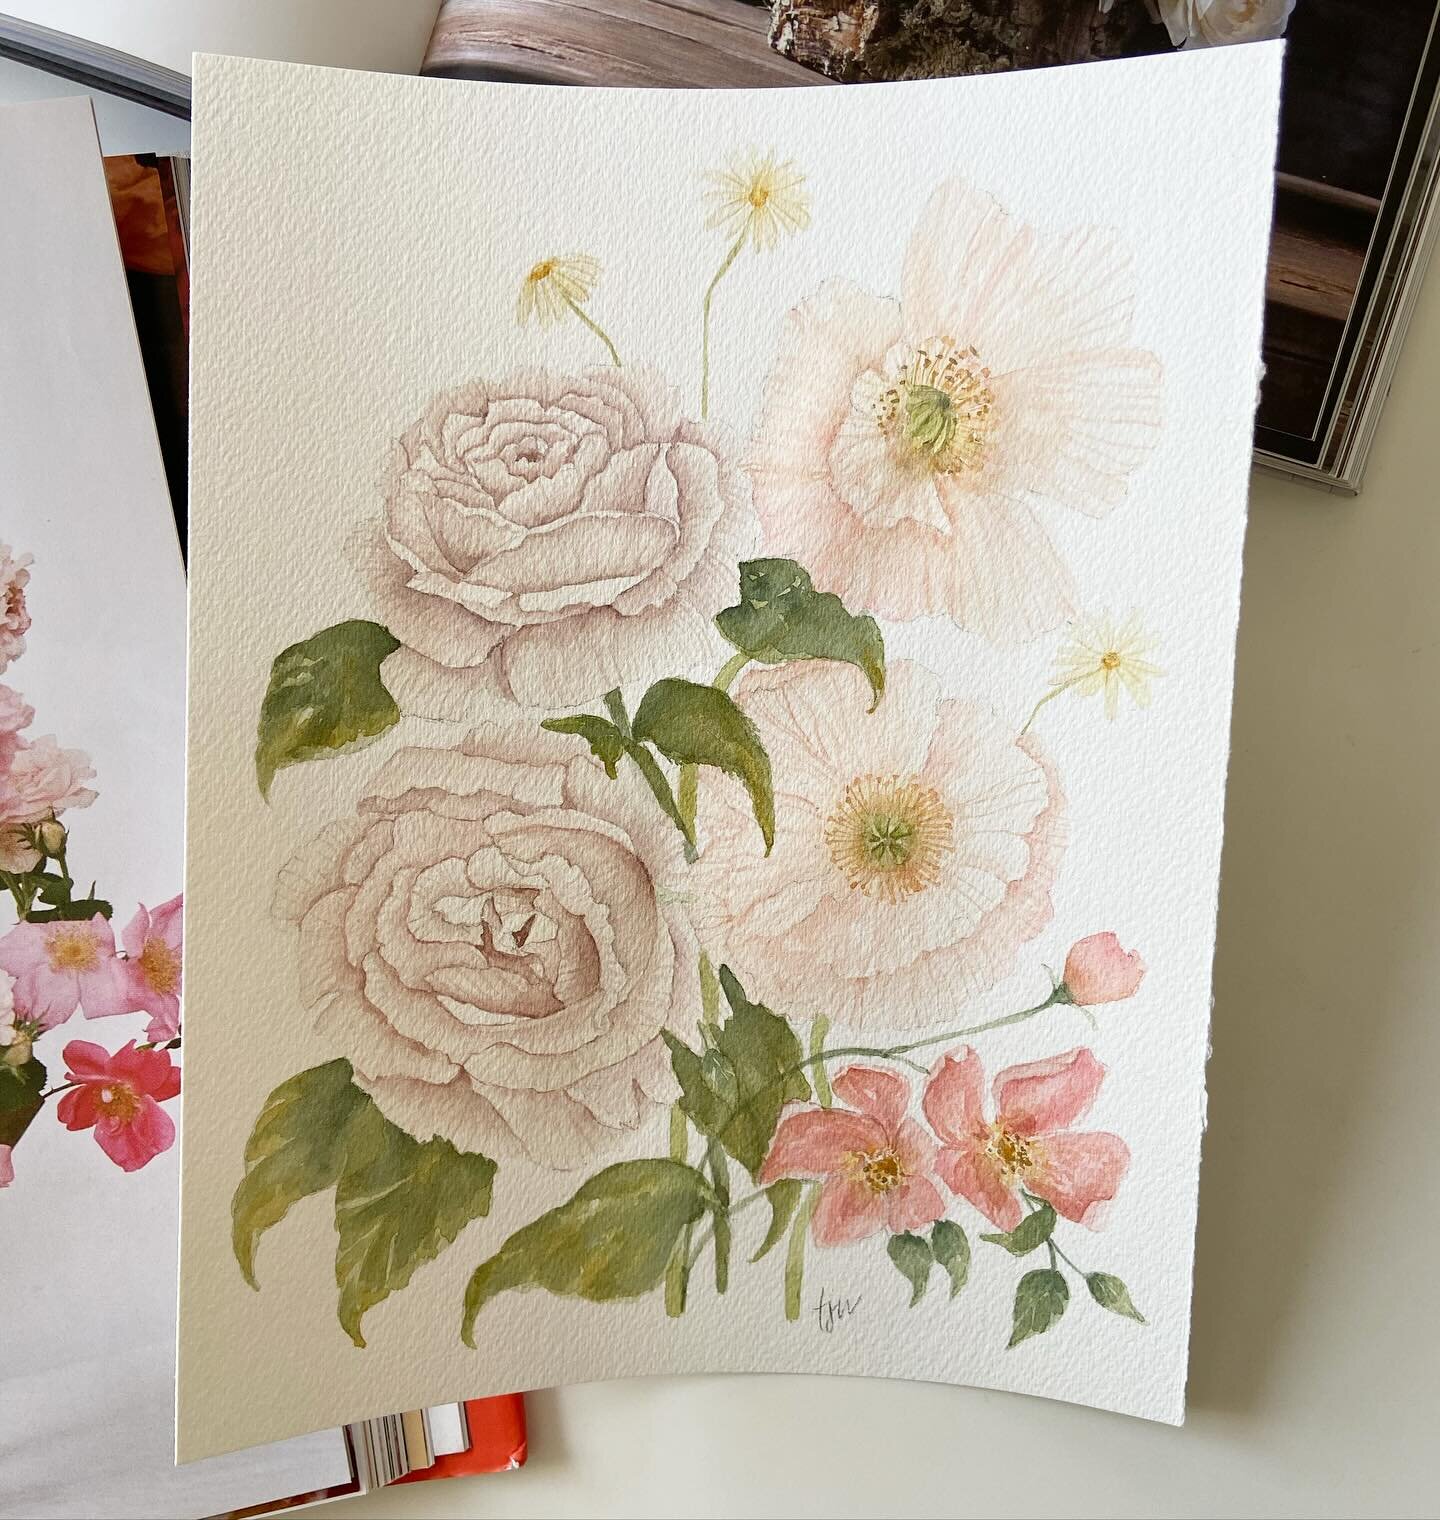 This commission is a spiritual bouquet &mdash; each flower represents a person praying for their friend going through cancer. 

I went with a more traditional approach to watercolor with this piece: I started with a sketch (I usually don&rsquo;t) and